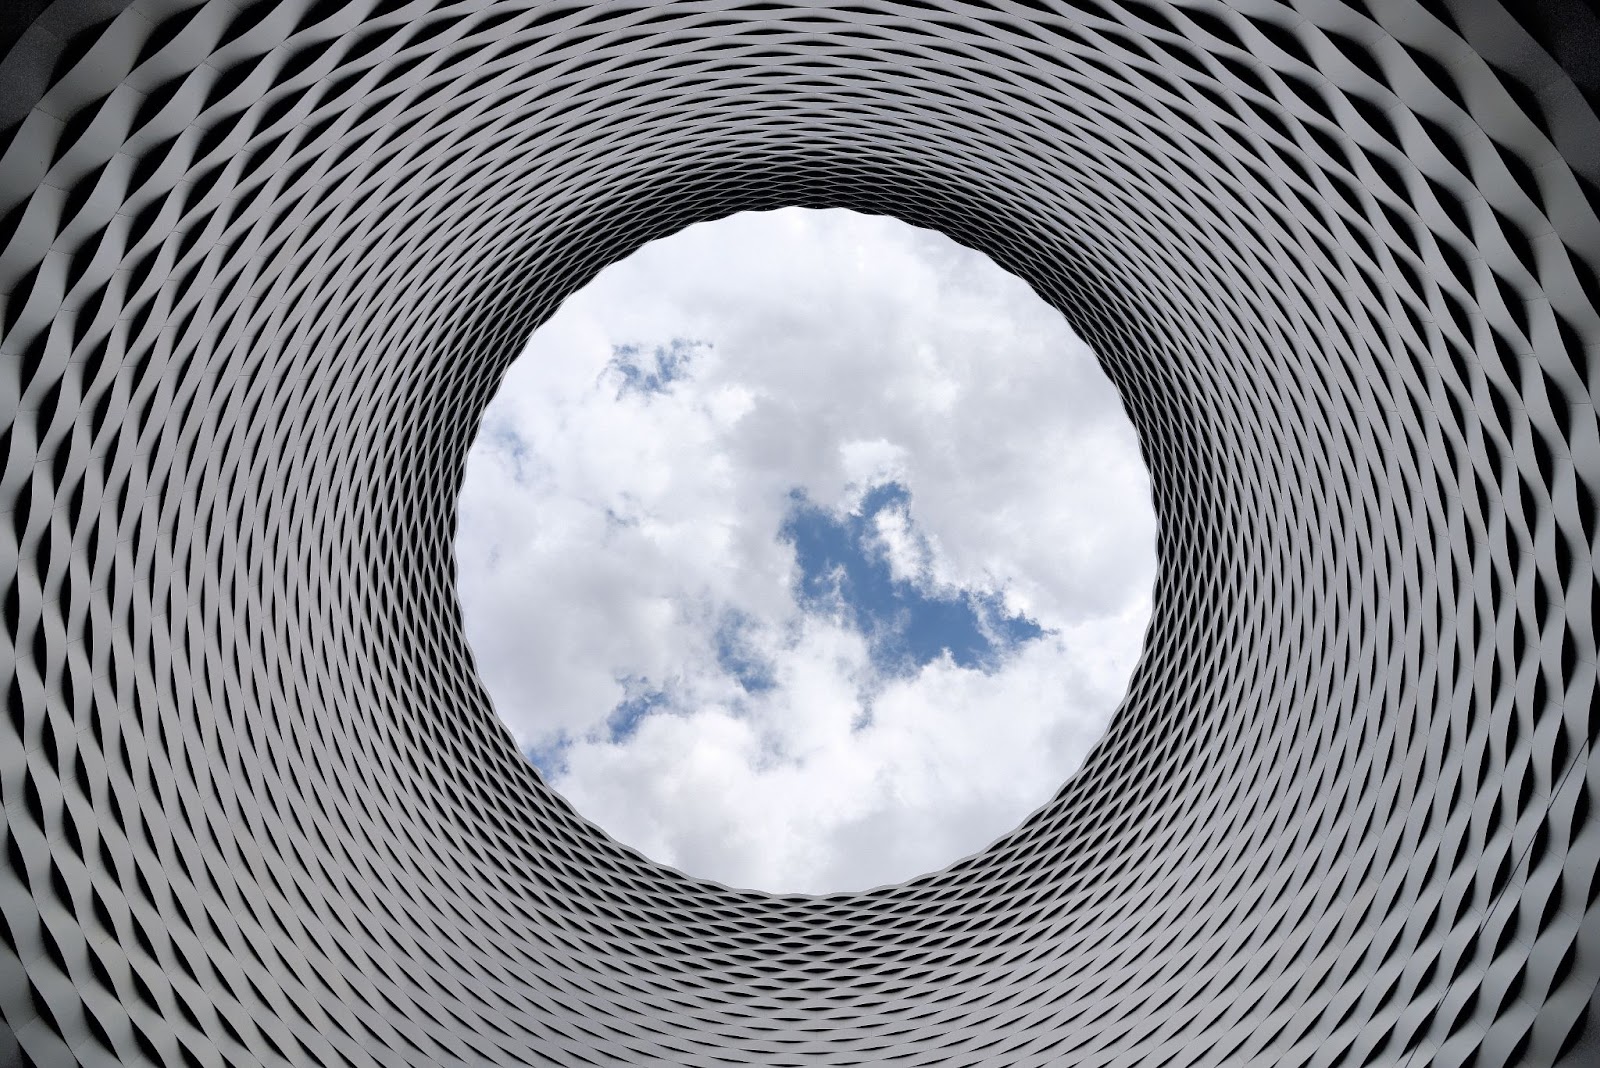 An image of a piece of sky, we are looking up at it through a spiralled tube.